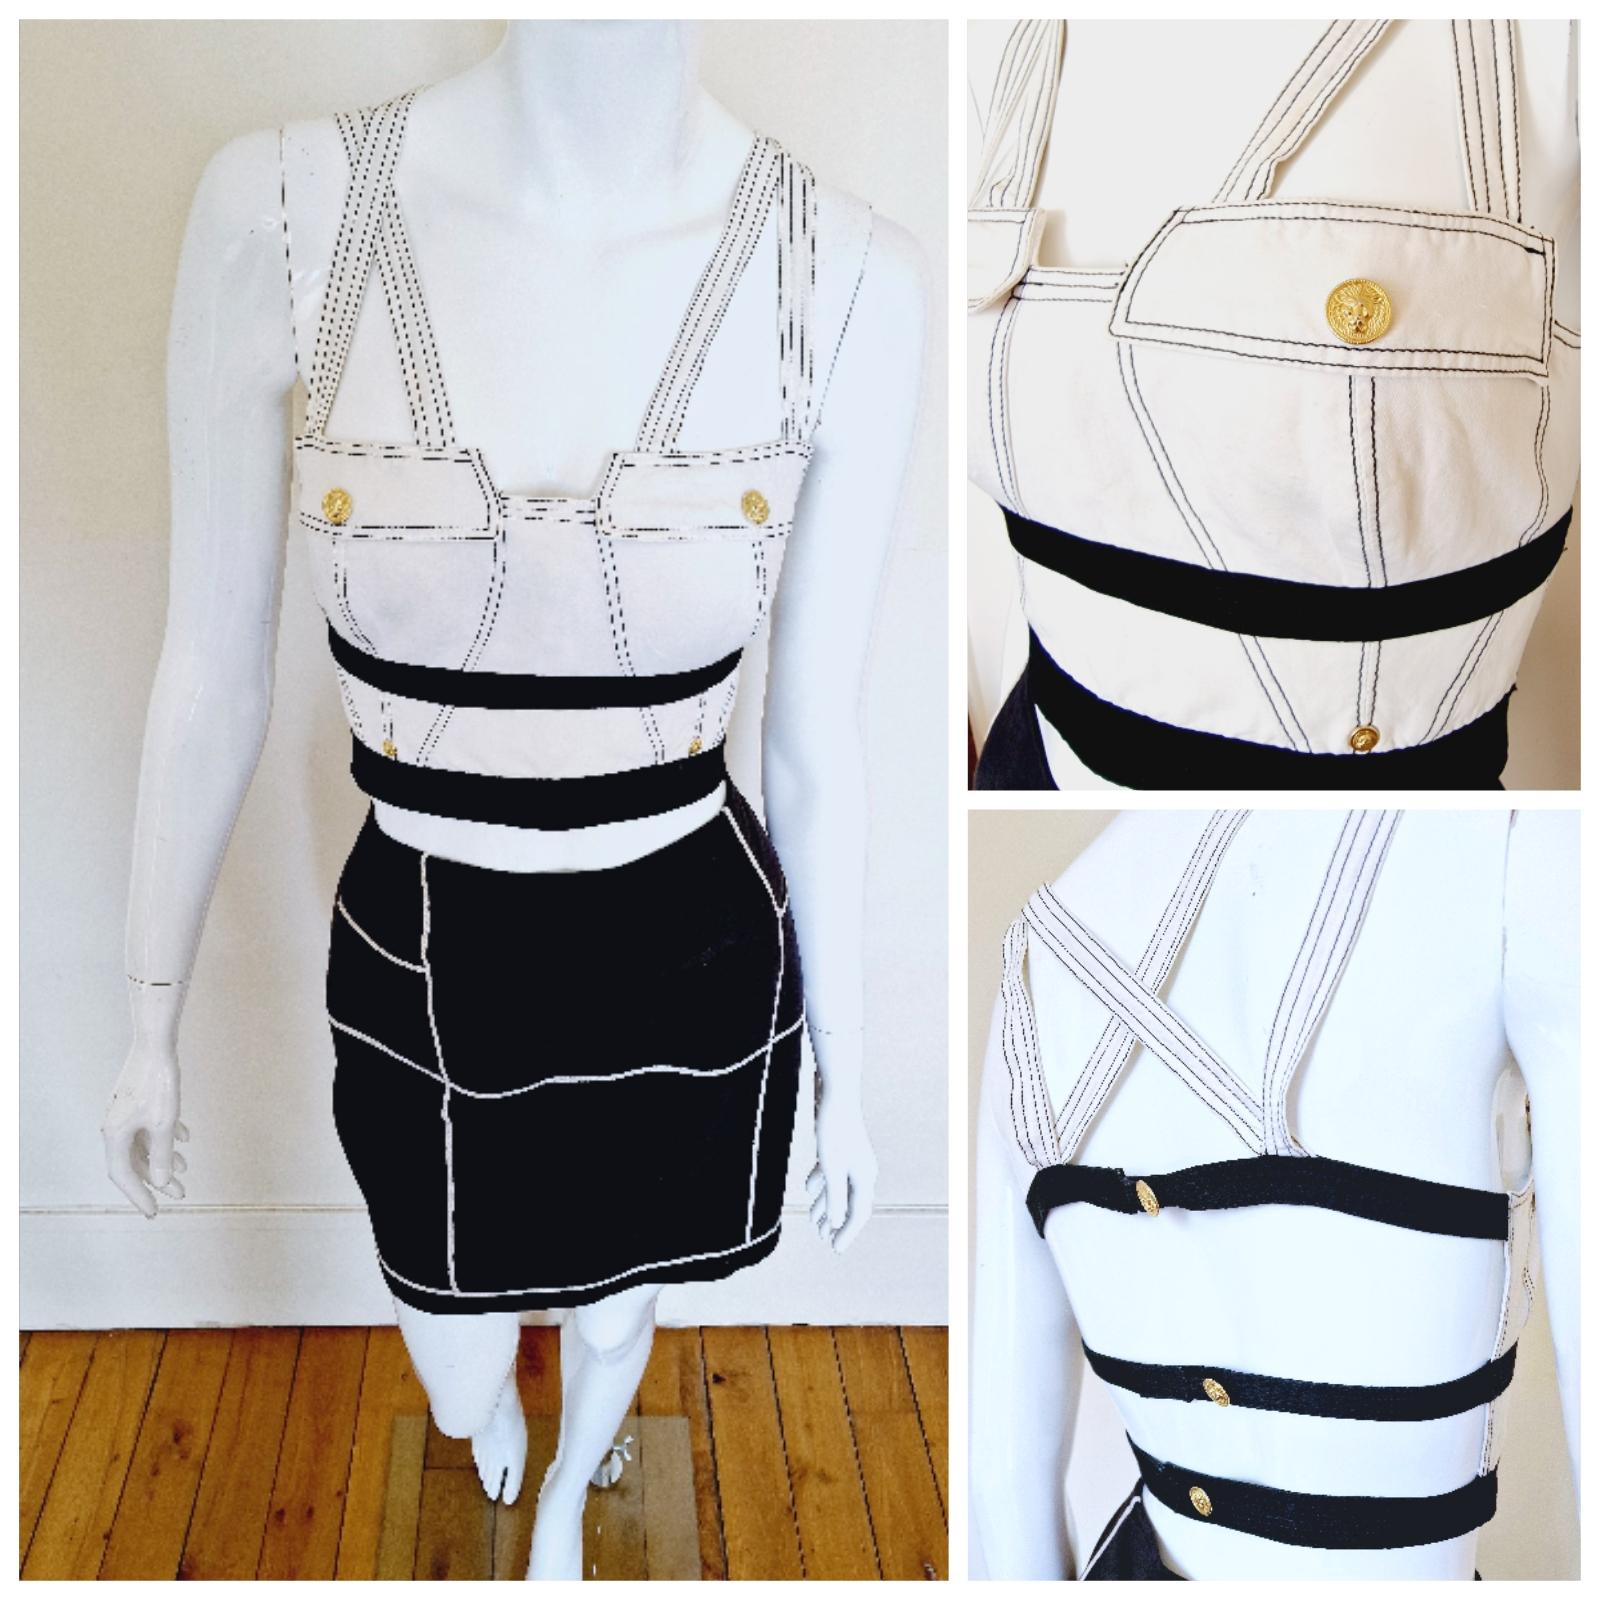 Gianni Versace BONDAGE 2-piece dress from the 90s!
Bustier + skirt!
Gianni`s Versus line.
Iconic look!
Lion Versace buttons and snaps!
A pocket on the skirt.

VERY GOOD condition!

SIZE
It fits for: bigger medium to smaller large. On the top you can